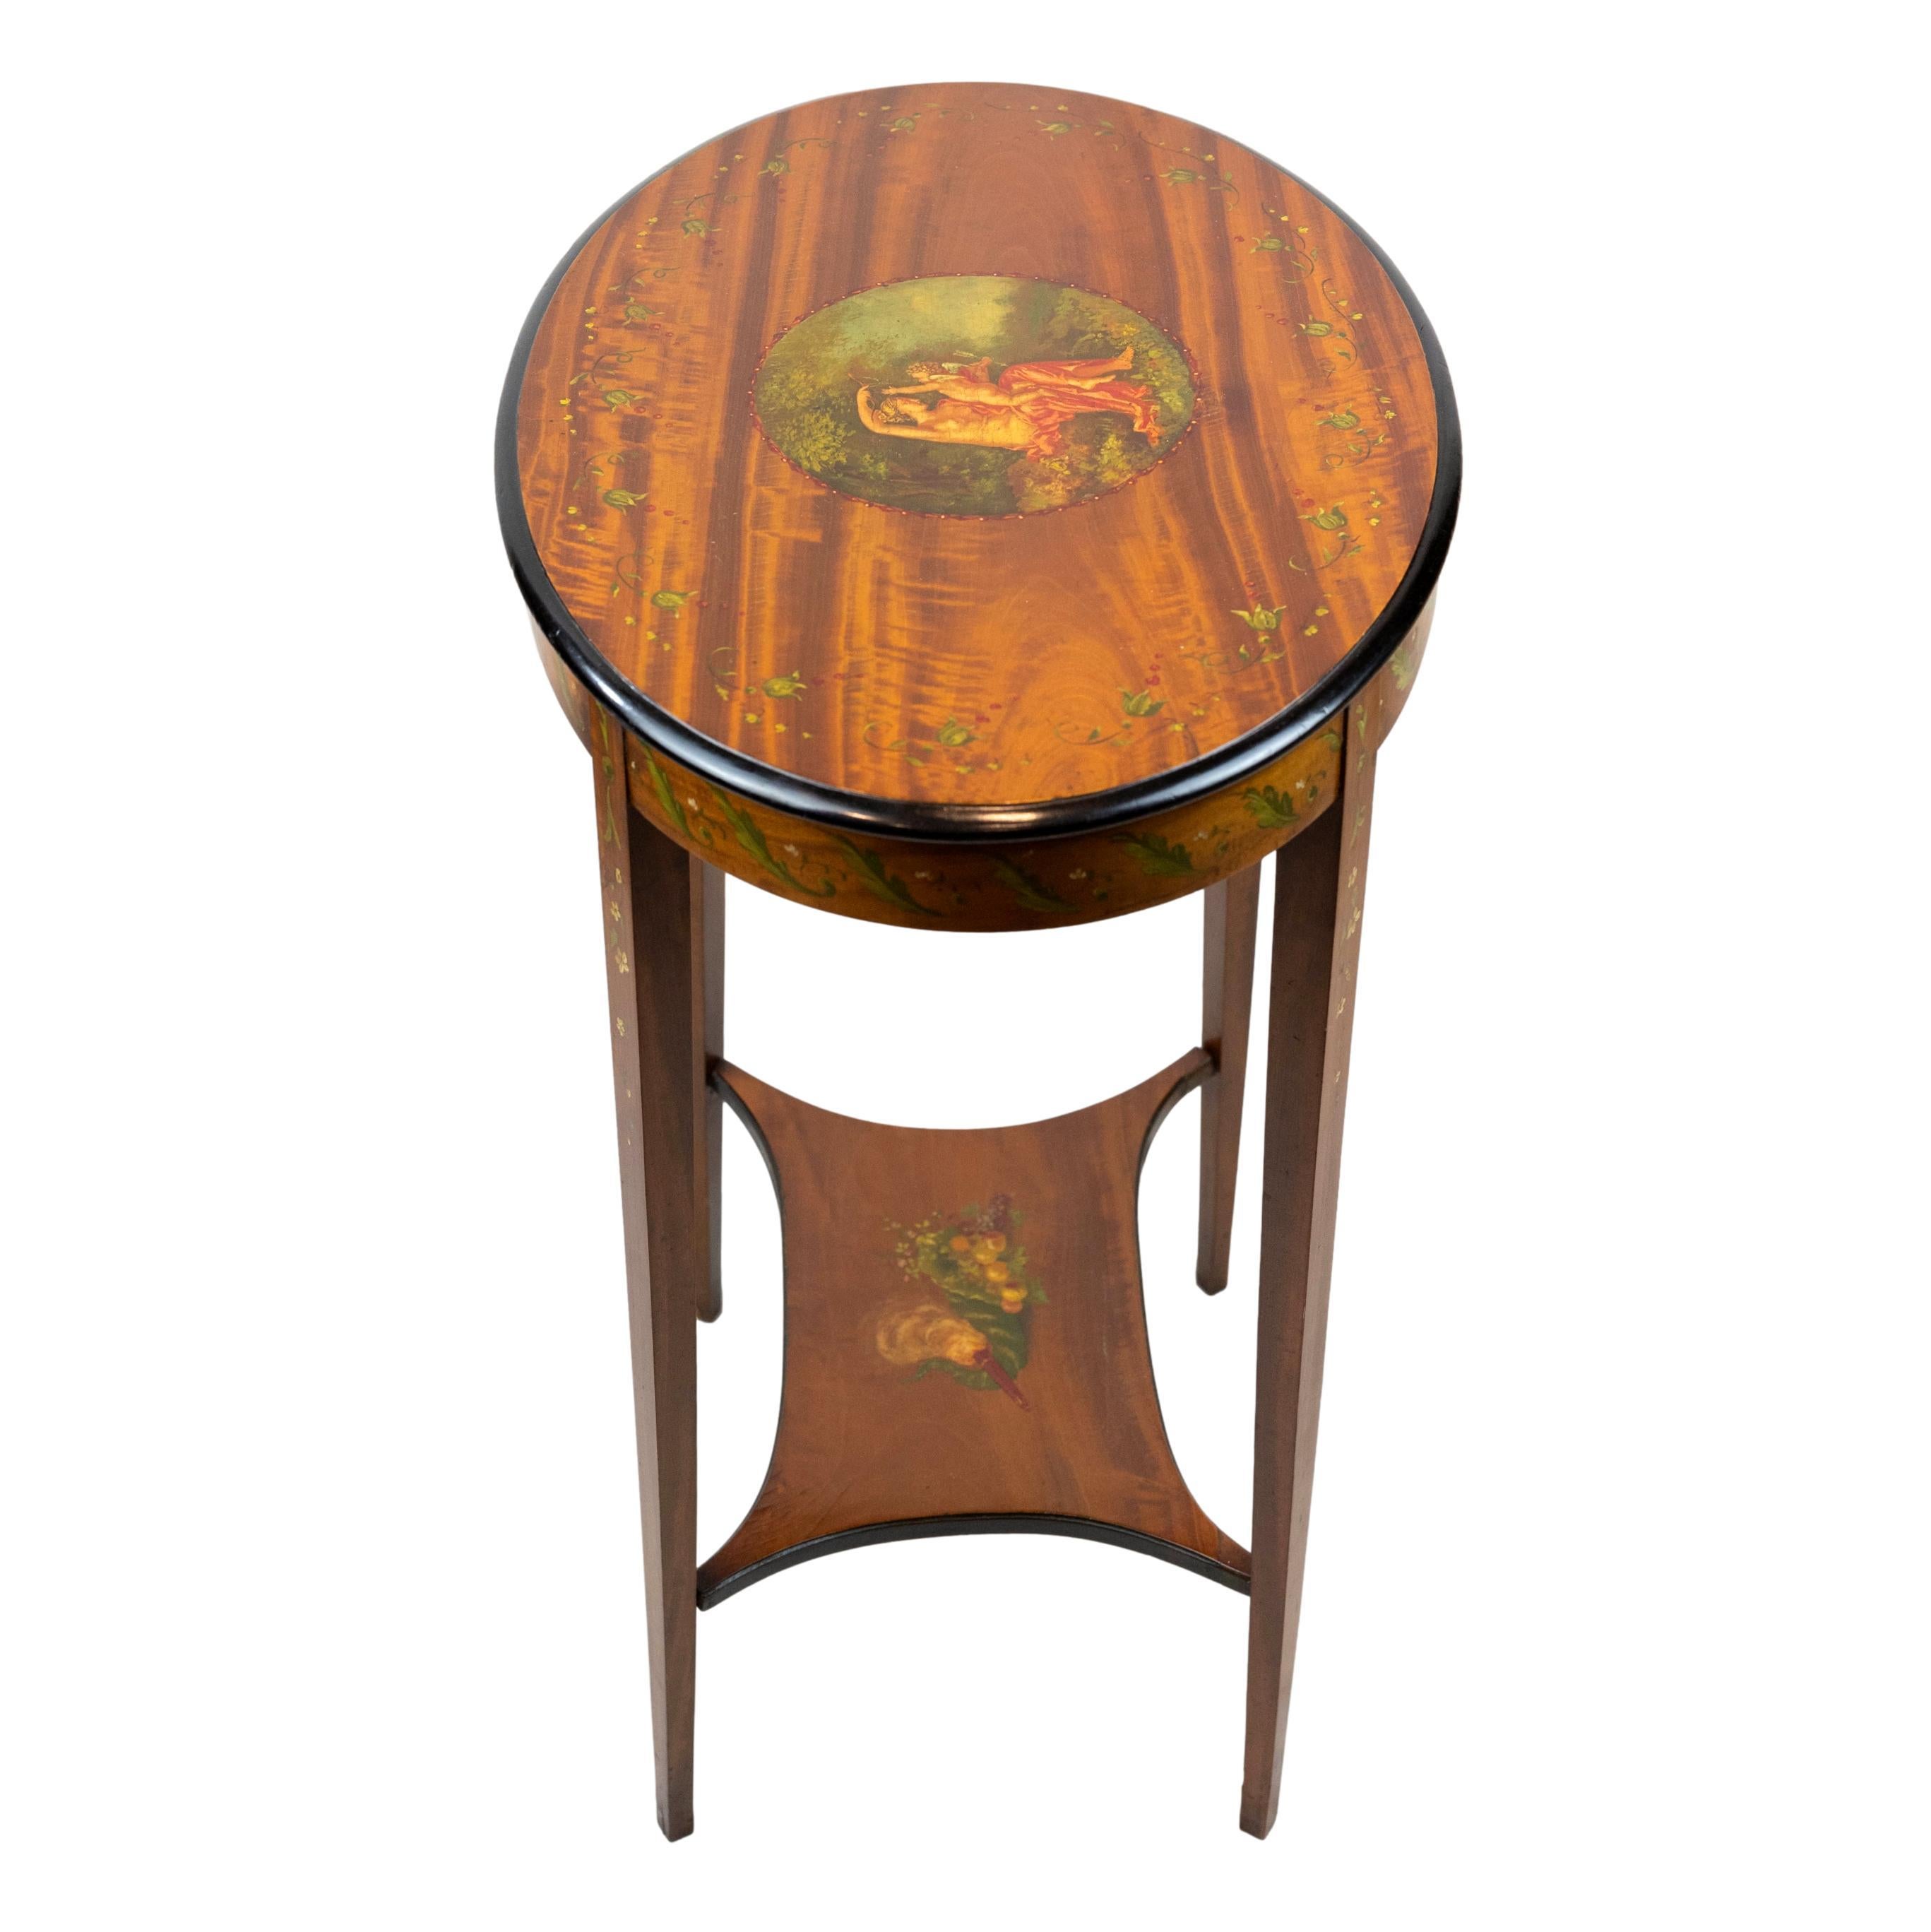 Edwardian Satinwood Two-Tier Occasional Table, the top with a hand-painted classical Roman depiction of Venus taking away her son Cupid's bow, with an ebonized banded edge, the lower shelf hand-painted with a fruit-filled cornucopia and fan, with